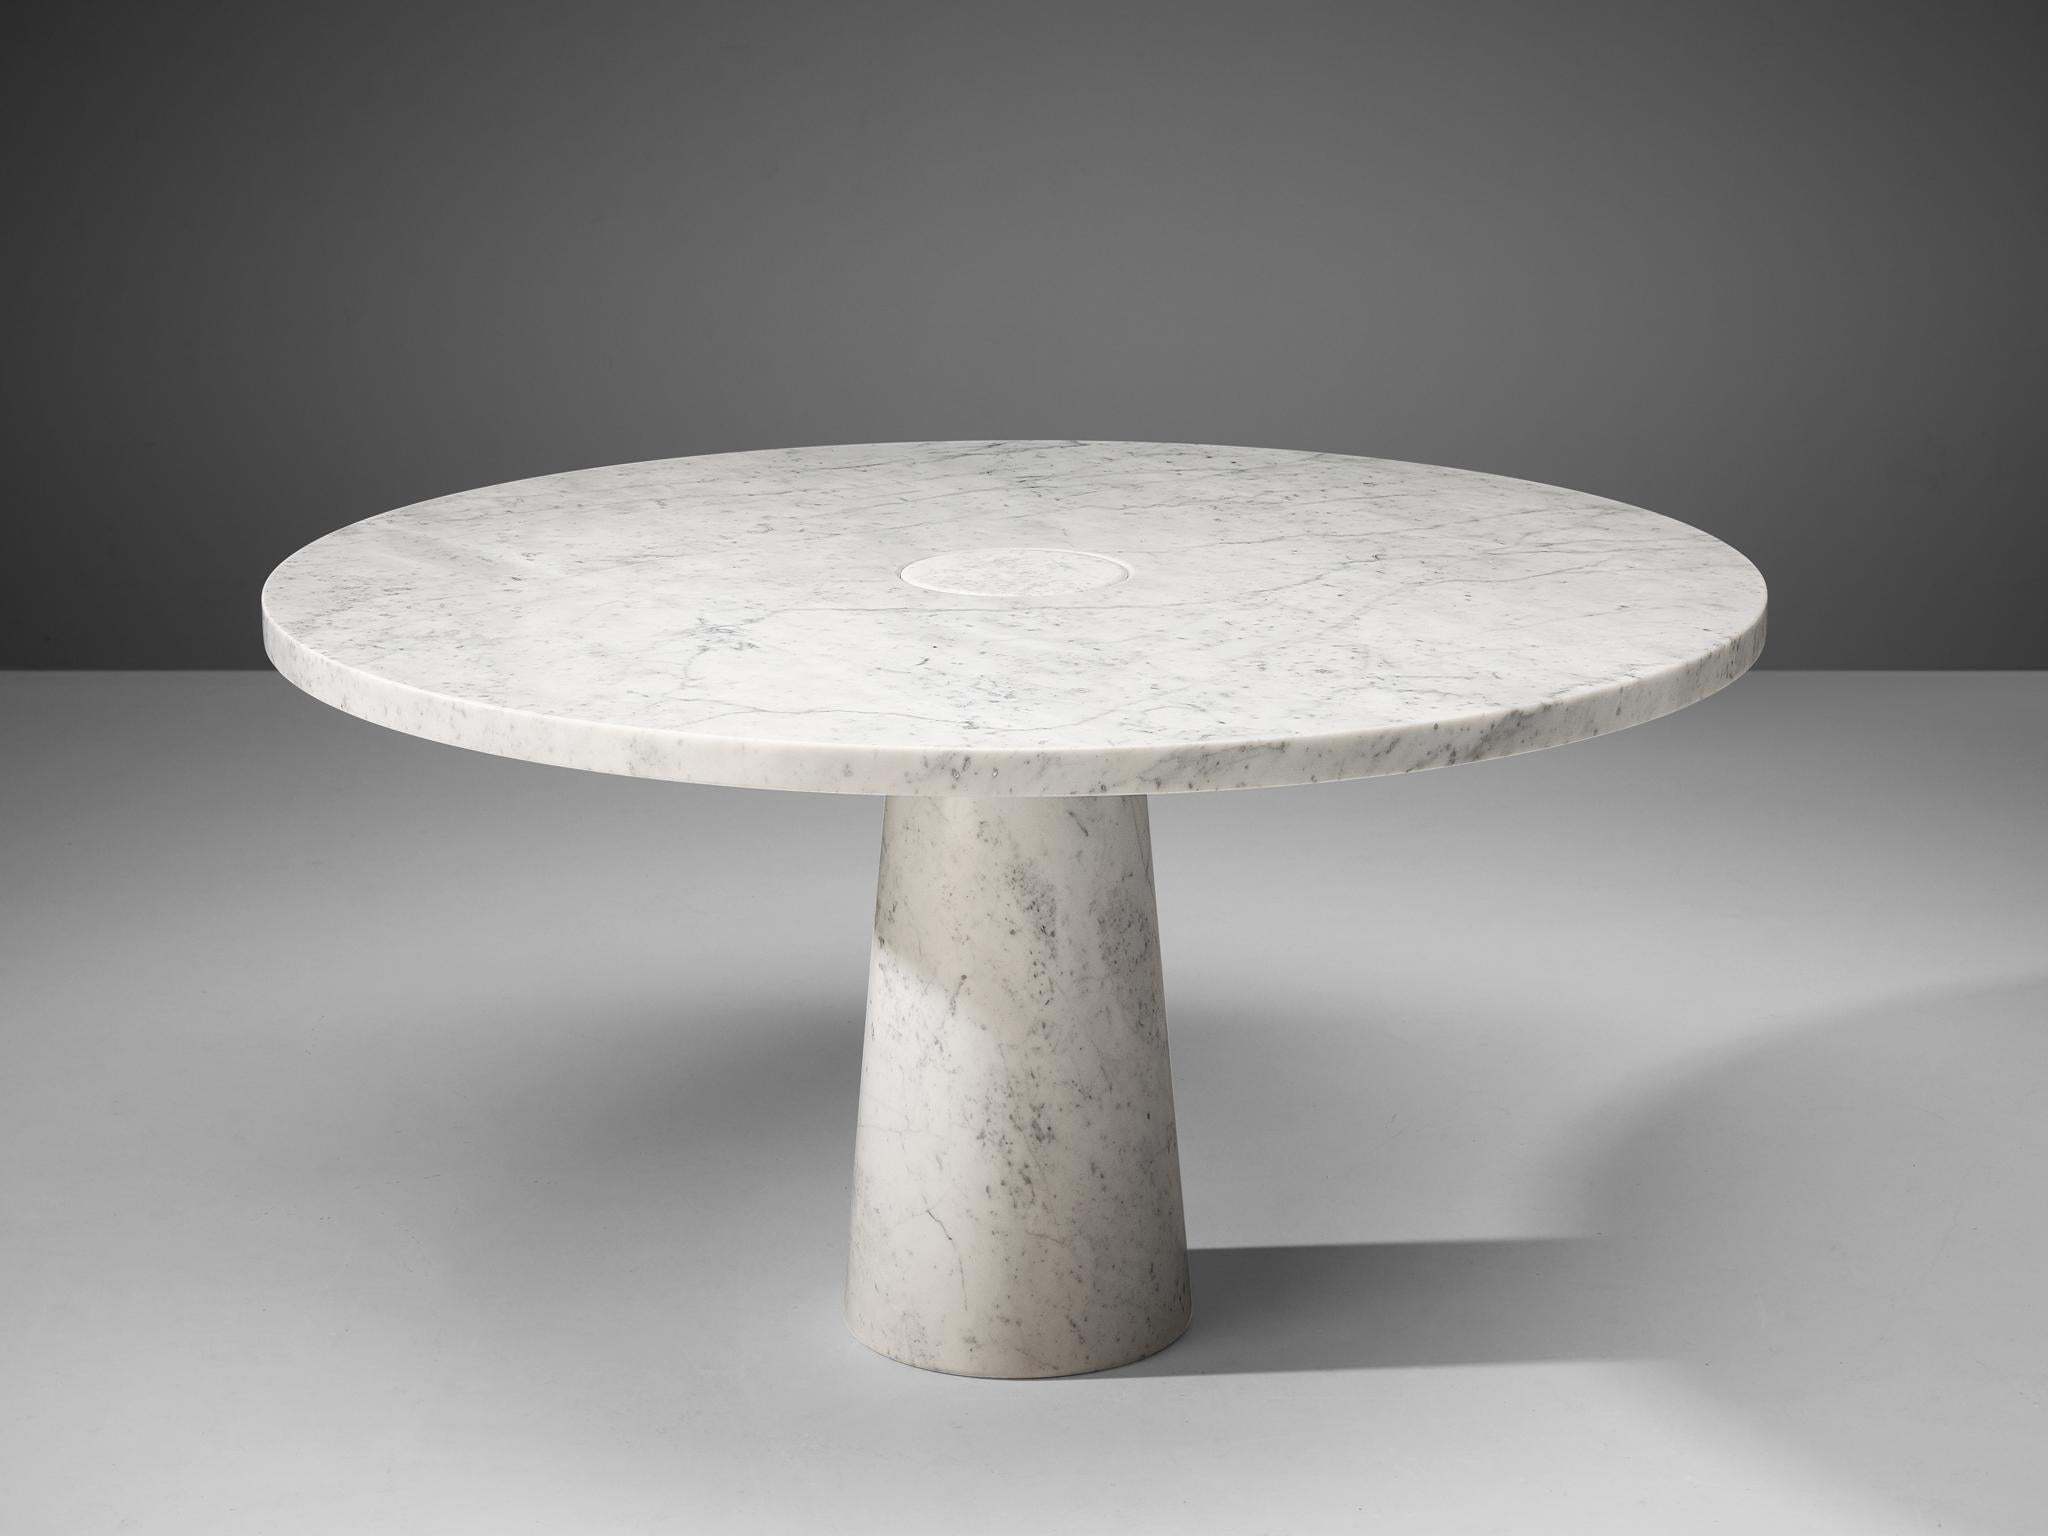 Angelo Mangiarotti, dining table, marble, Italy, 1970s

This architectural table is a skilful example of Postmodern design by Angelo Mangiarotti. The circular table features no joints or clamps and is architectural in its structure featuring one